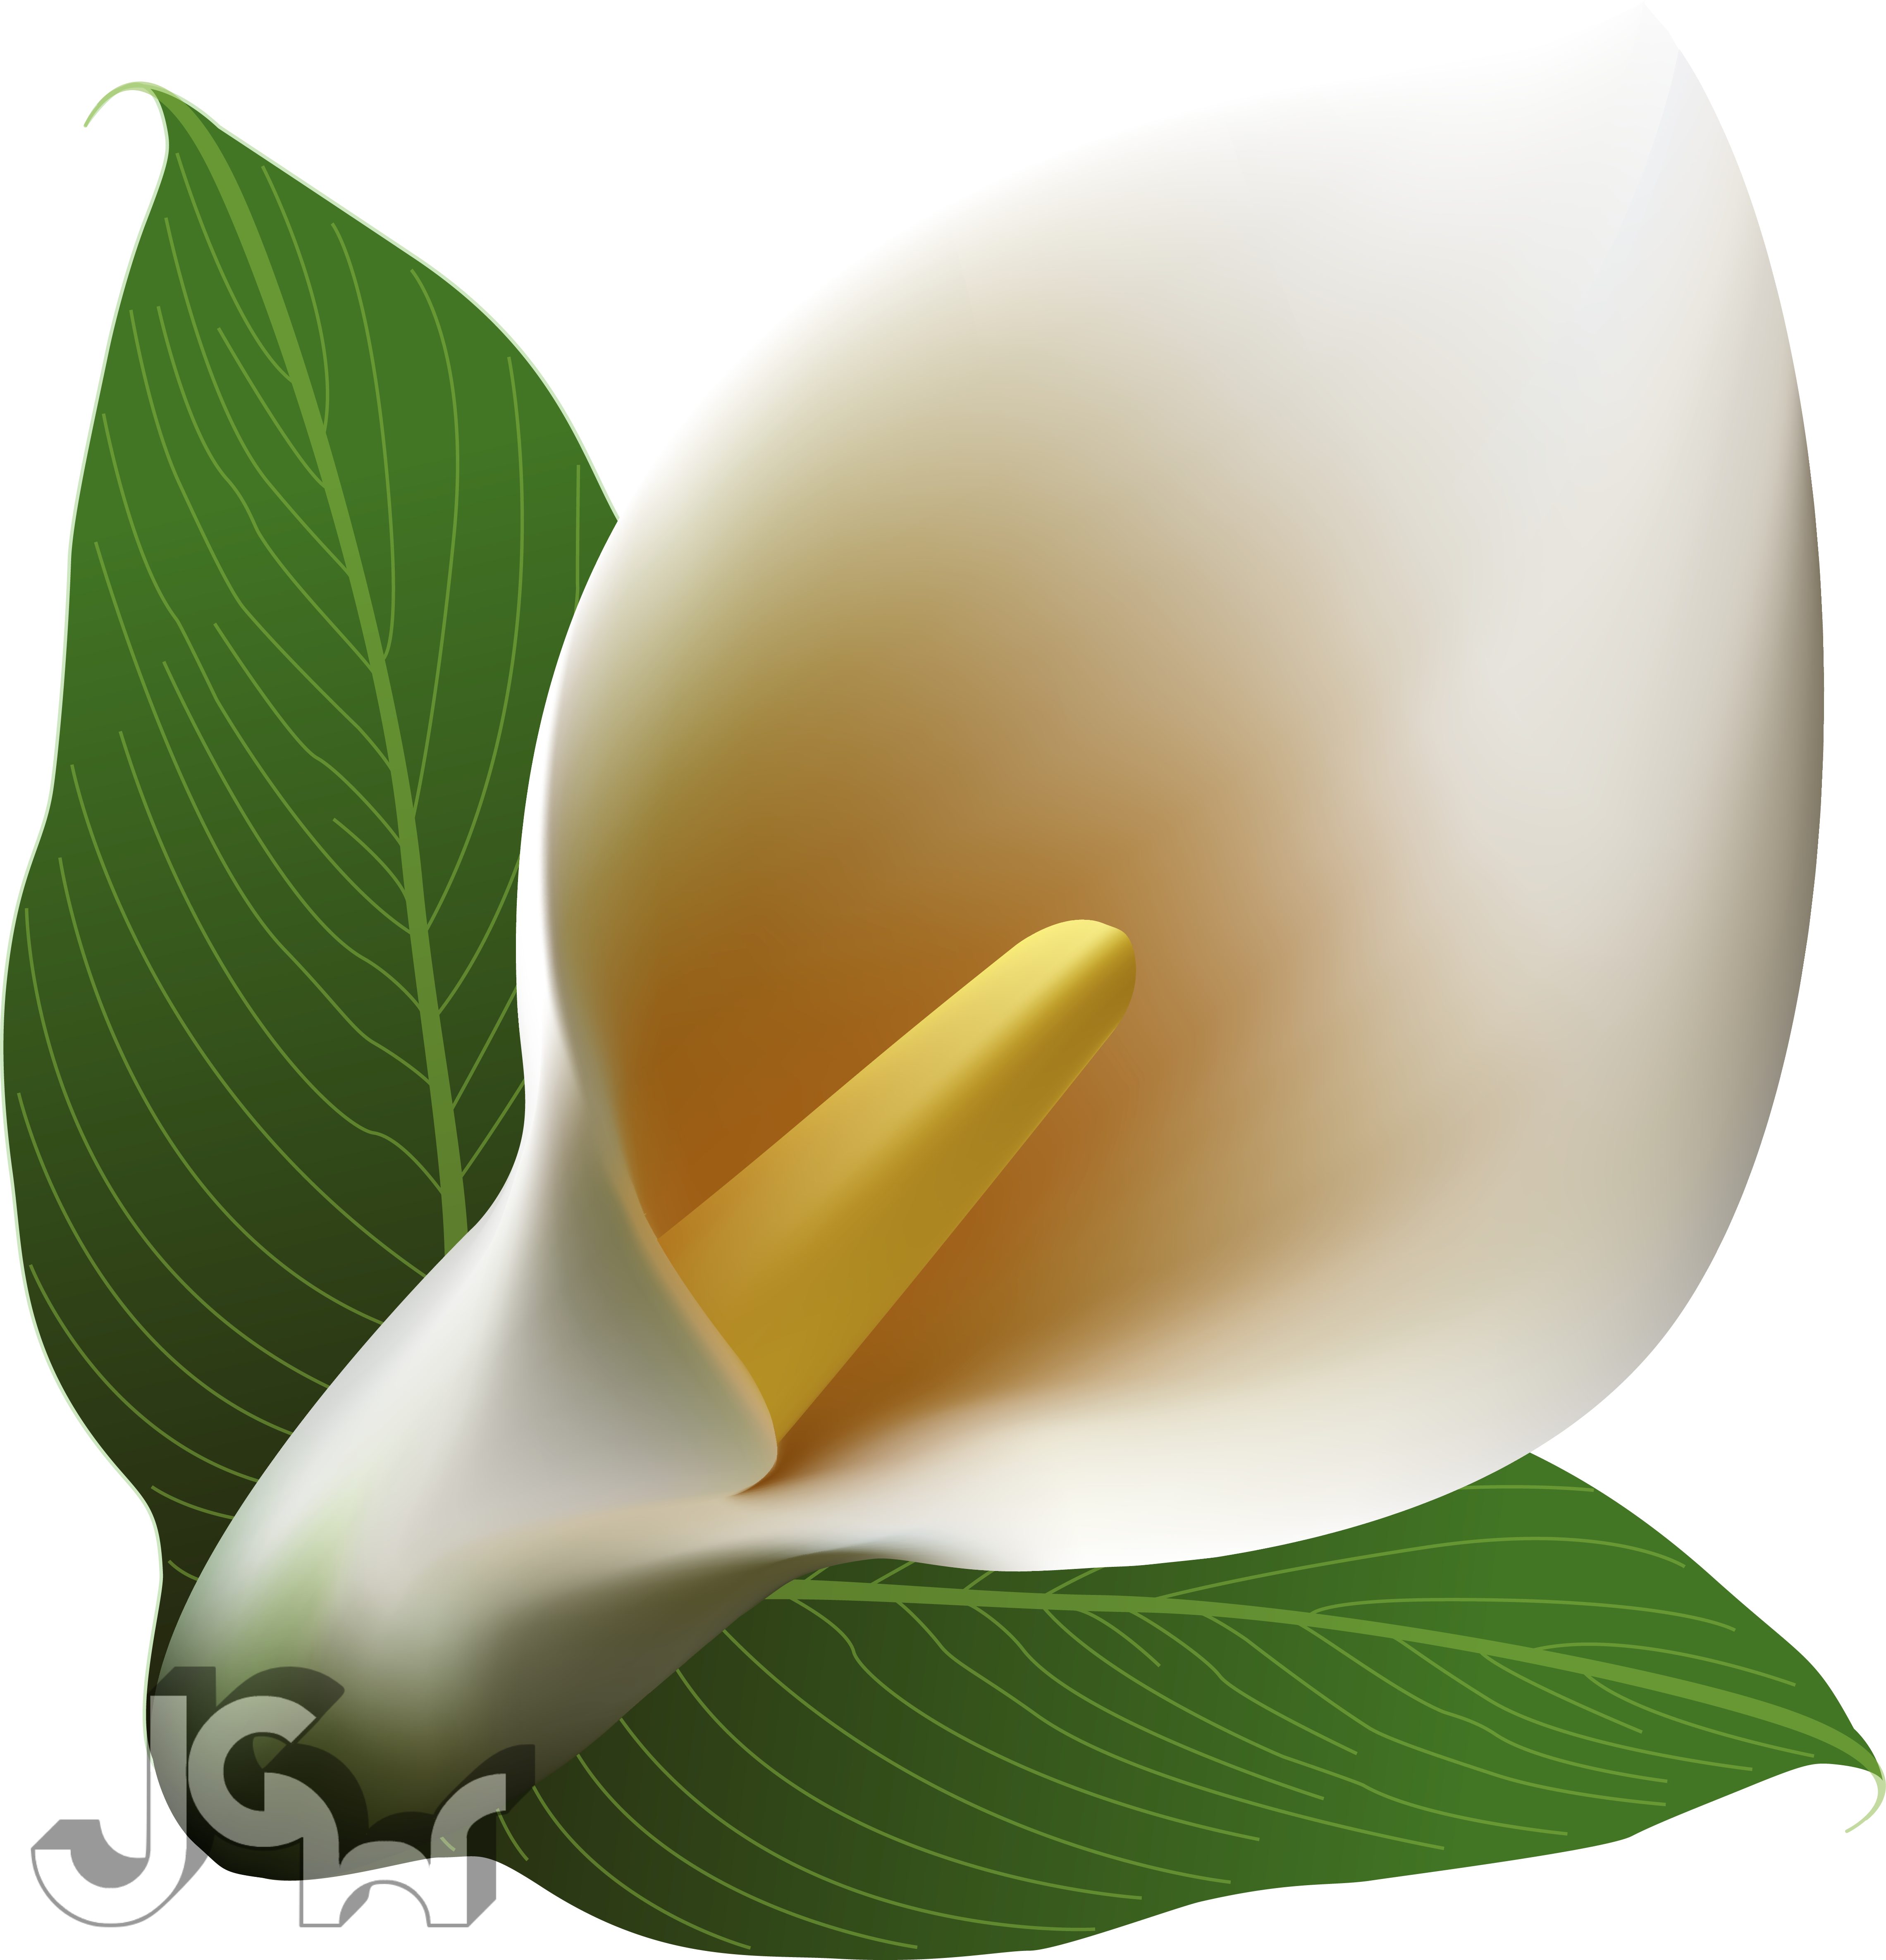 Download and share clipart about Calla Lily - Arum-lily, Find more high qua...